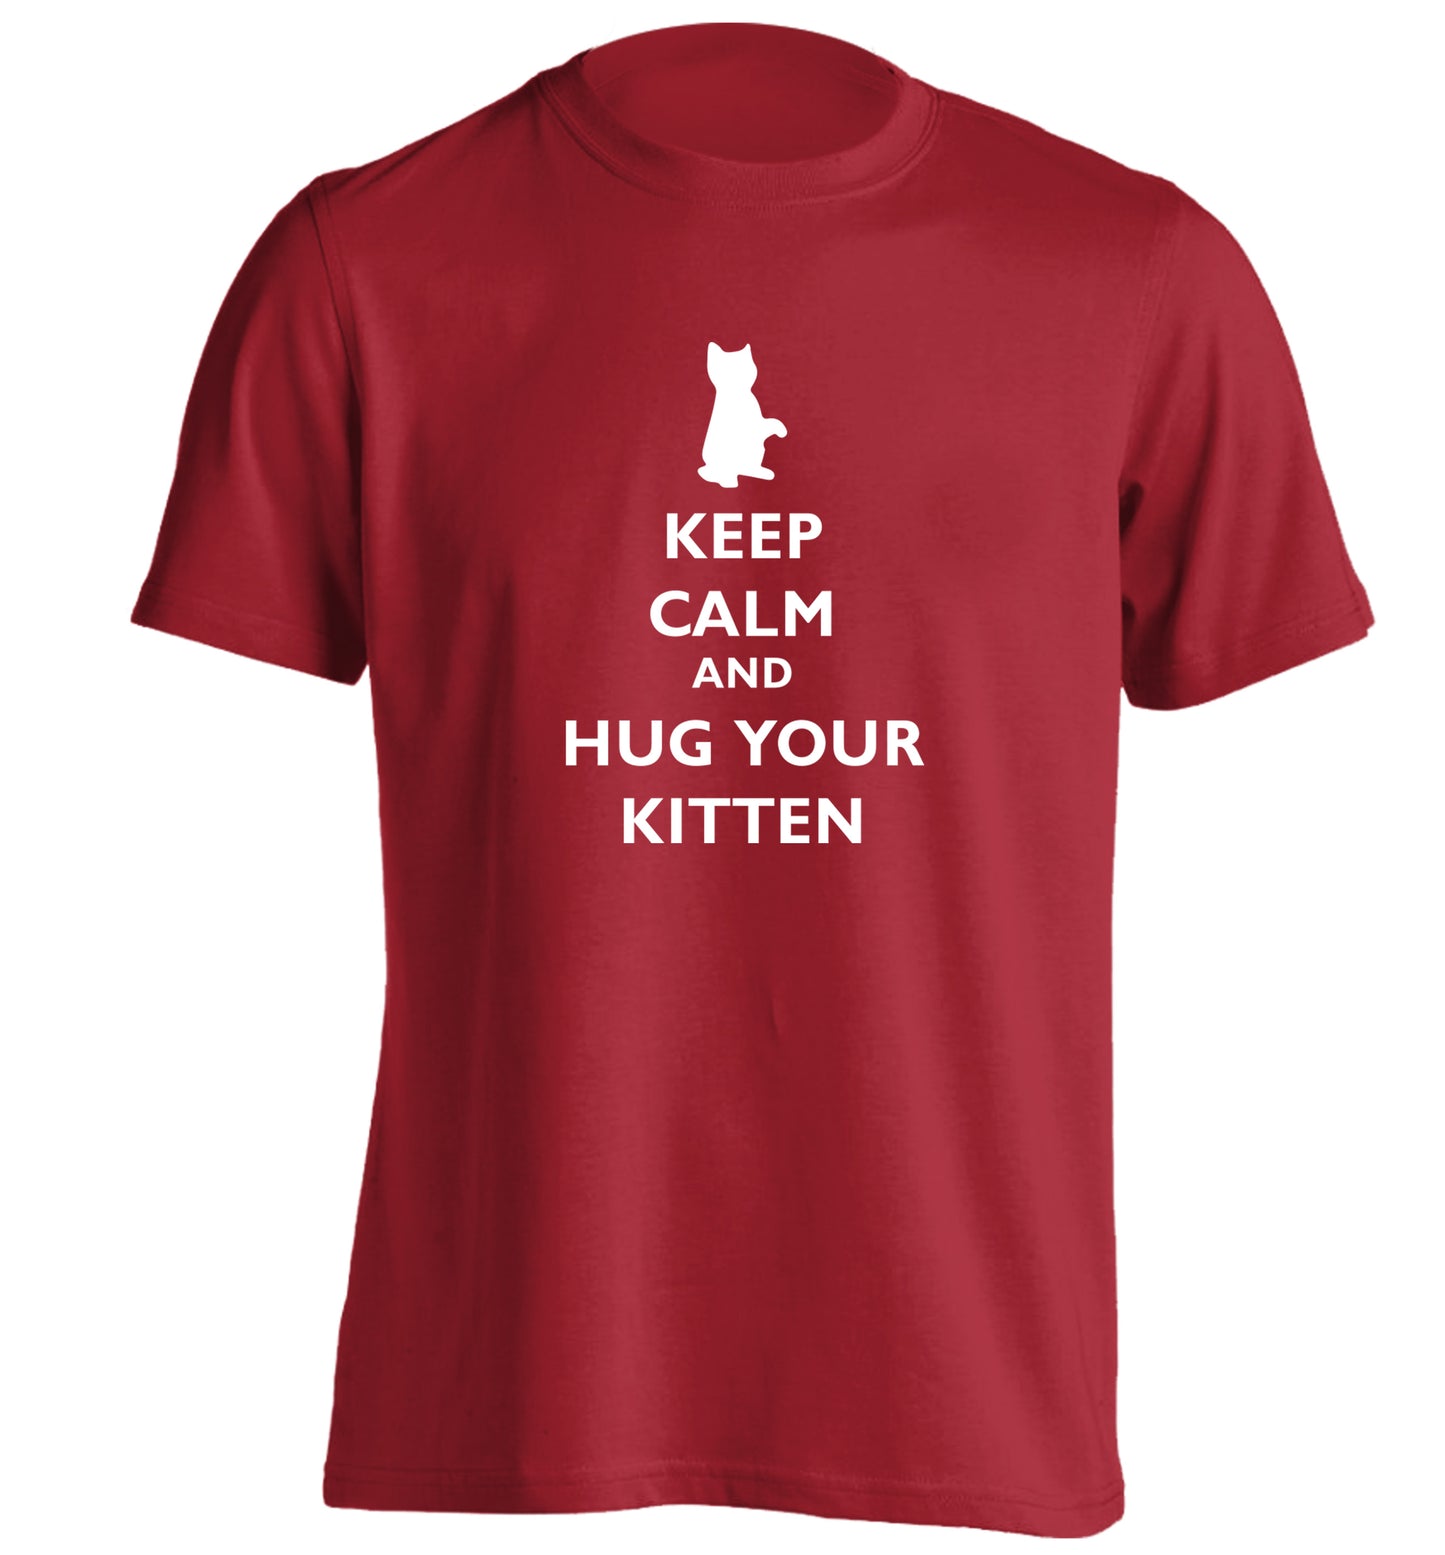 Keep calm and hug your kitten adults unisex red Tshirt 2XL